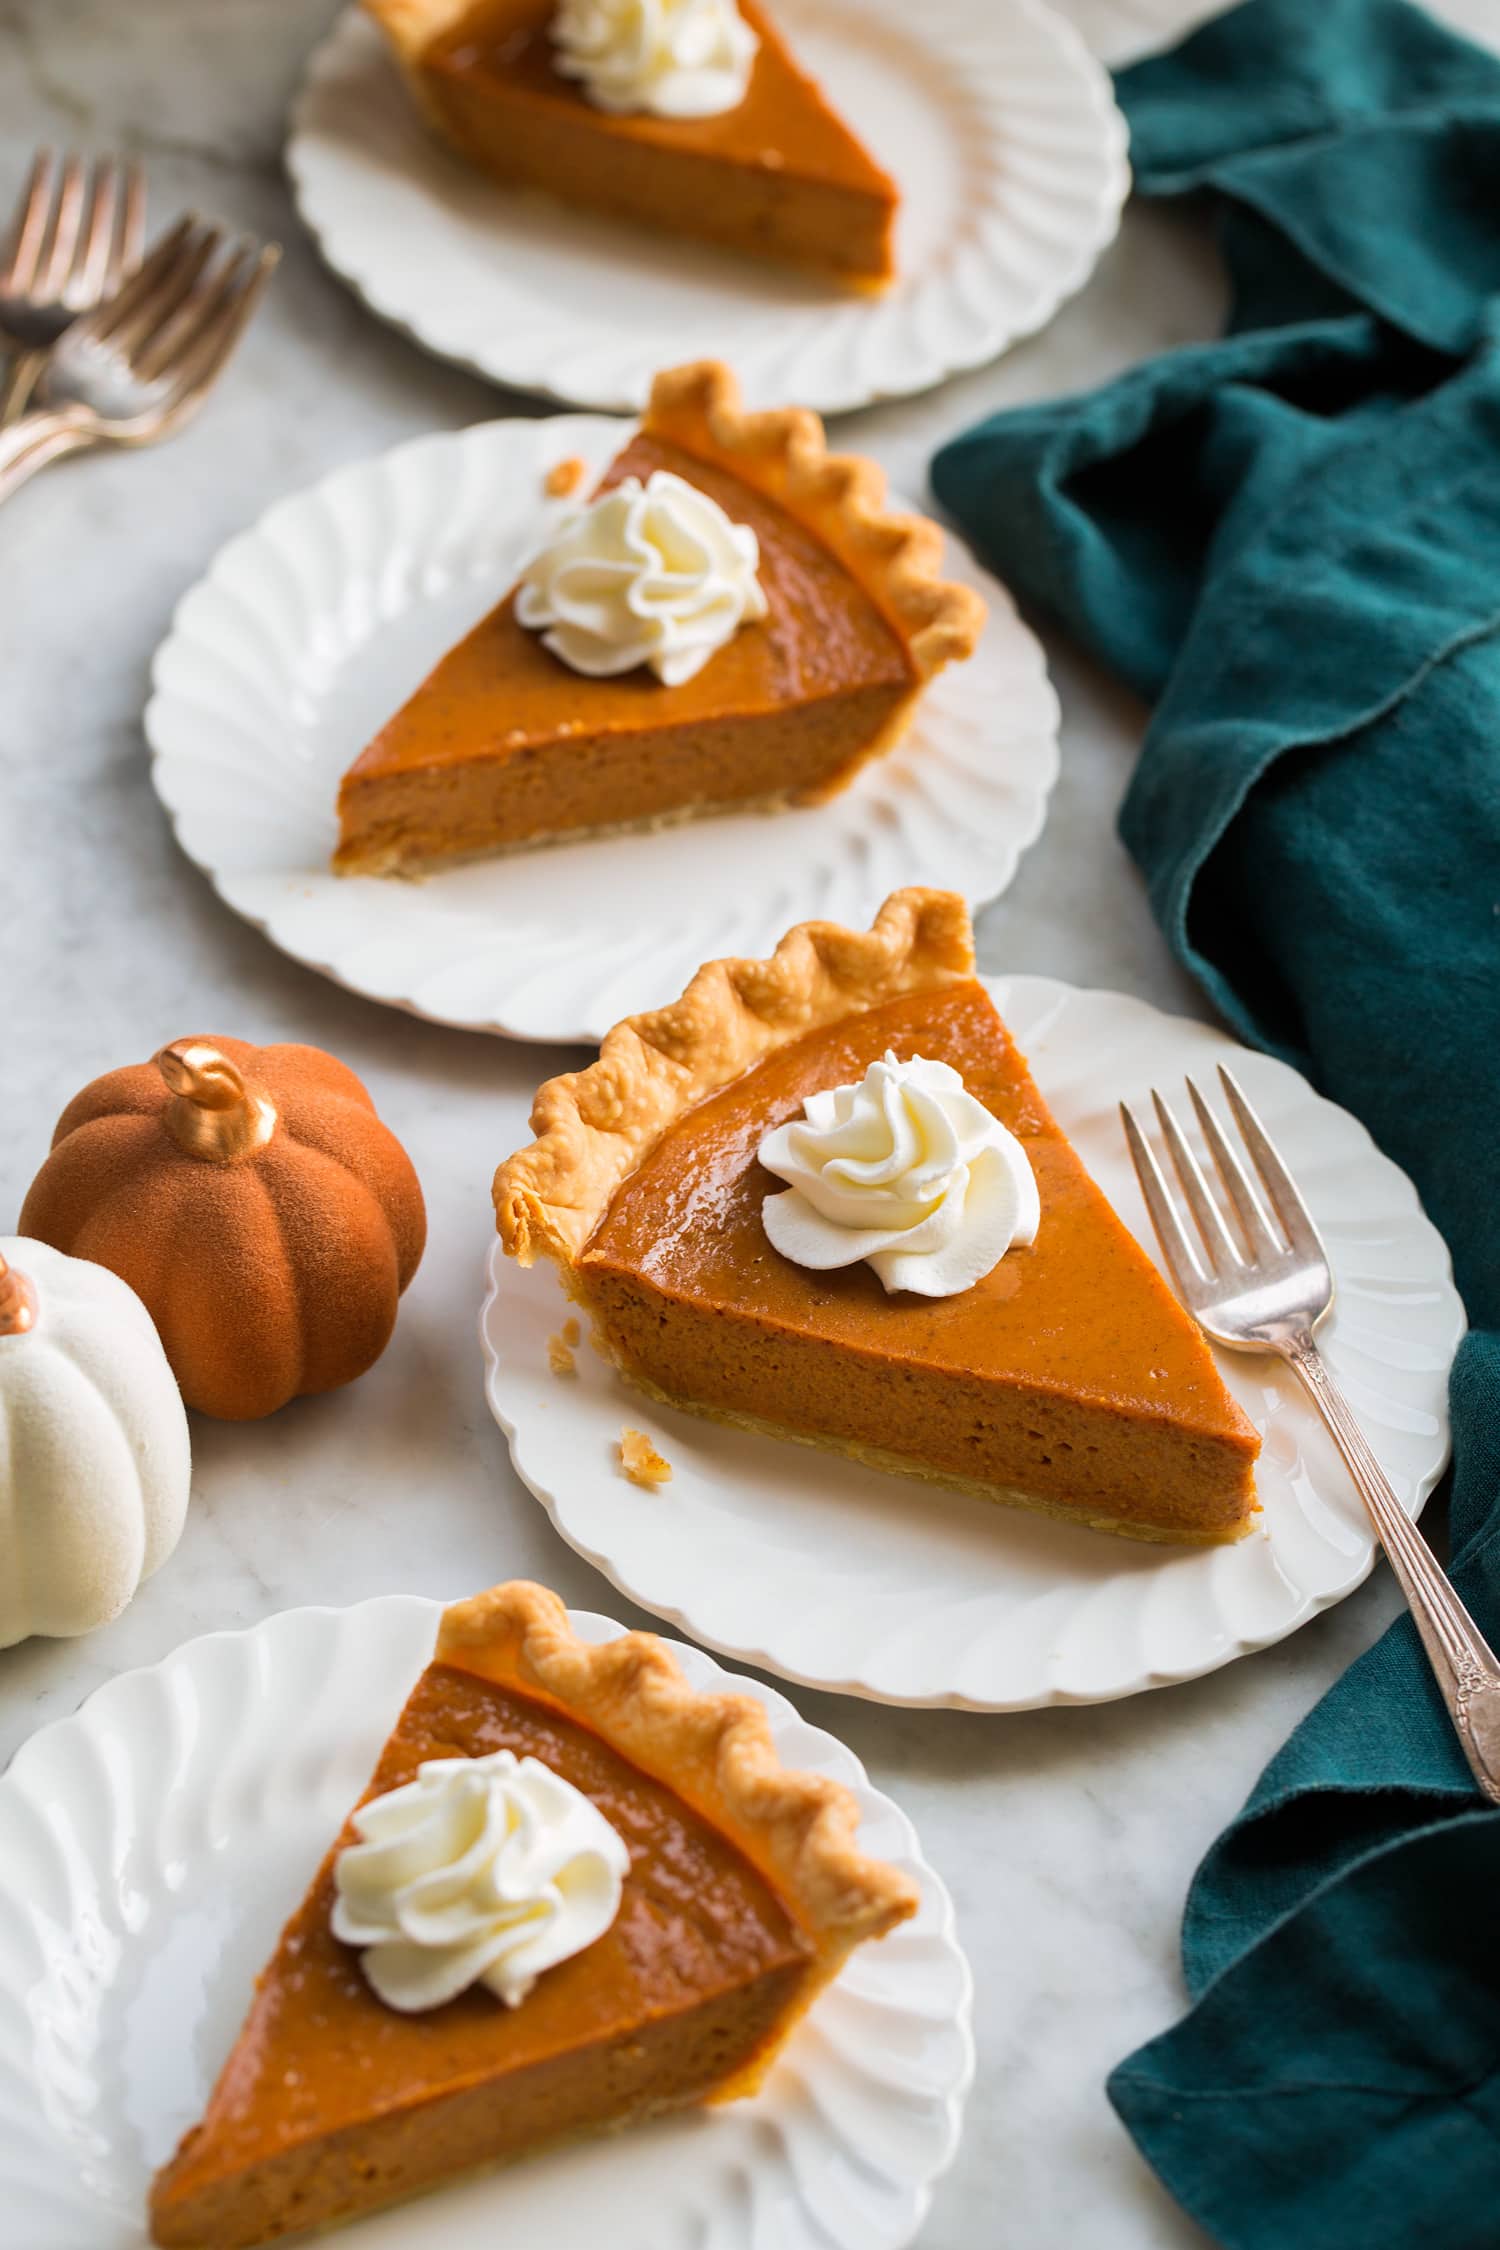 Four slices of pumpkin pie with whipped cream.